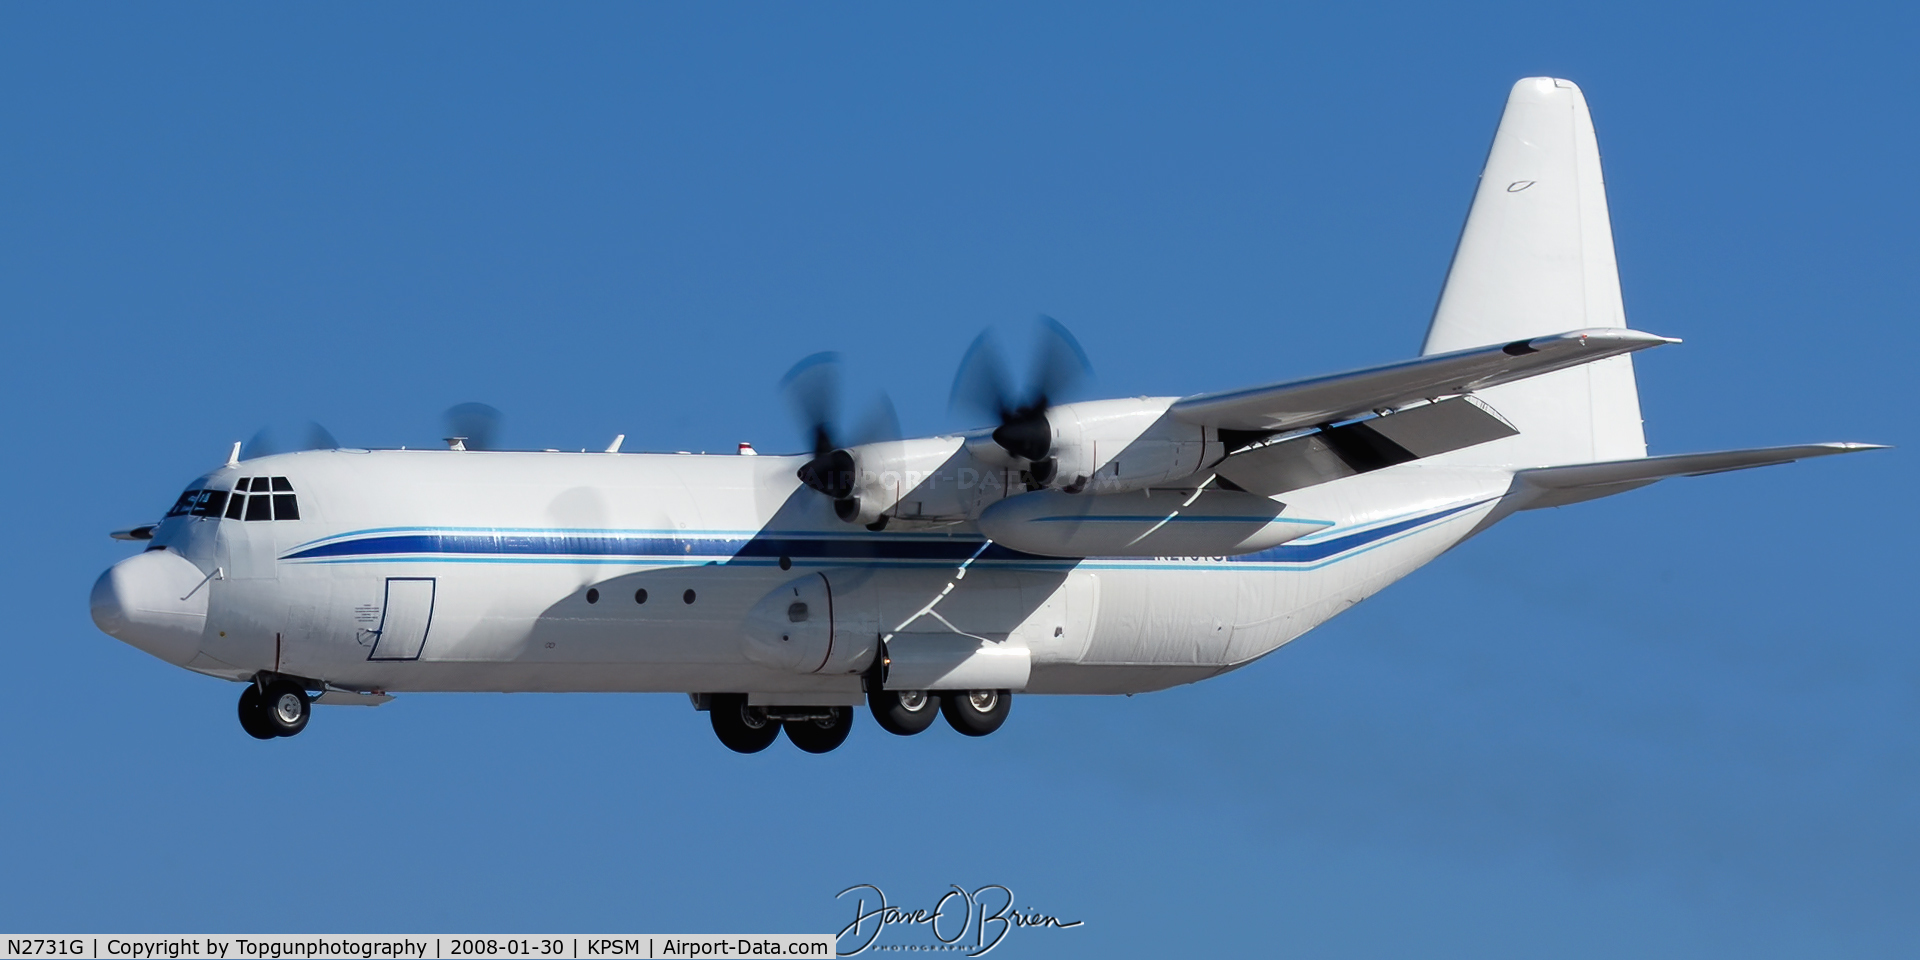 N2731G, 1975 Lockheed L-100-30 Hercules (L-382G) C/N 382-4582, Coming in to land after a successful engine test